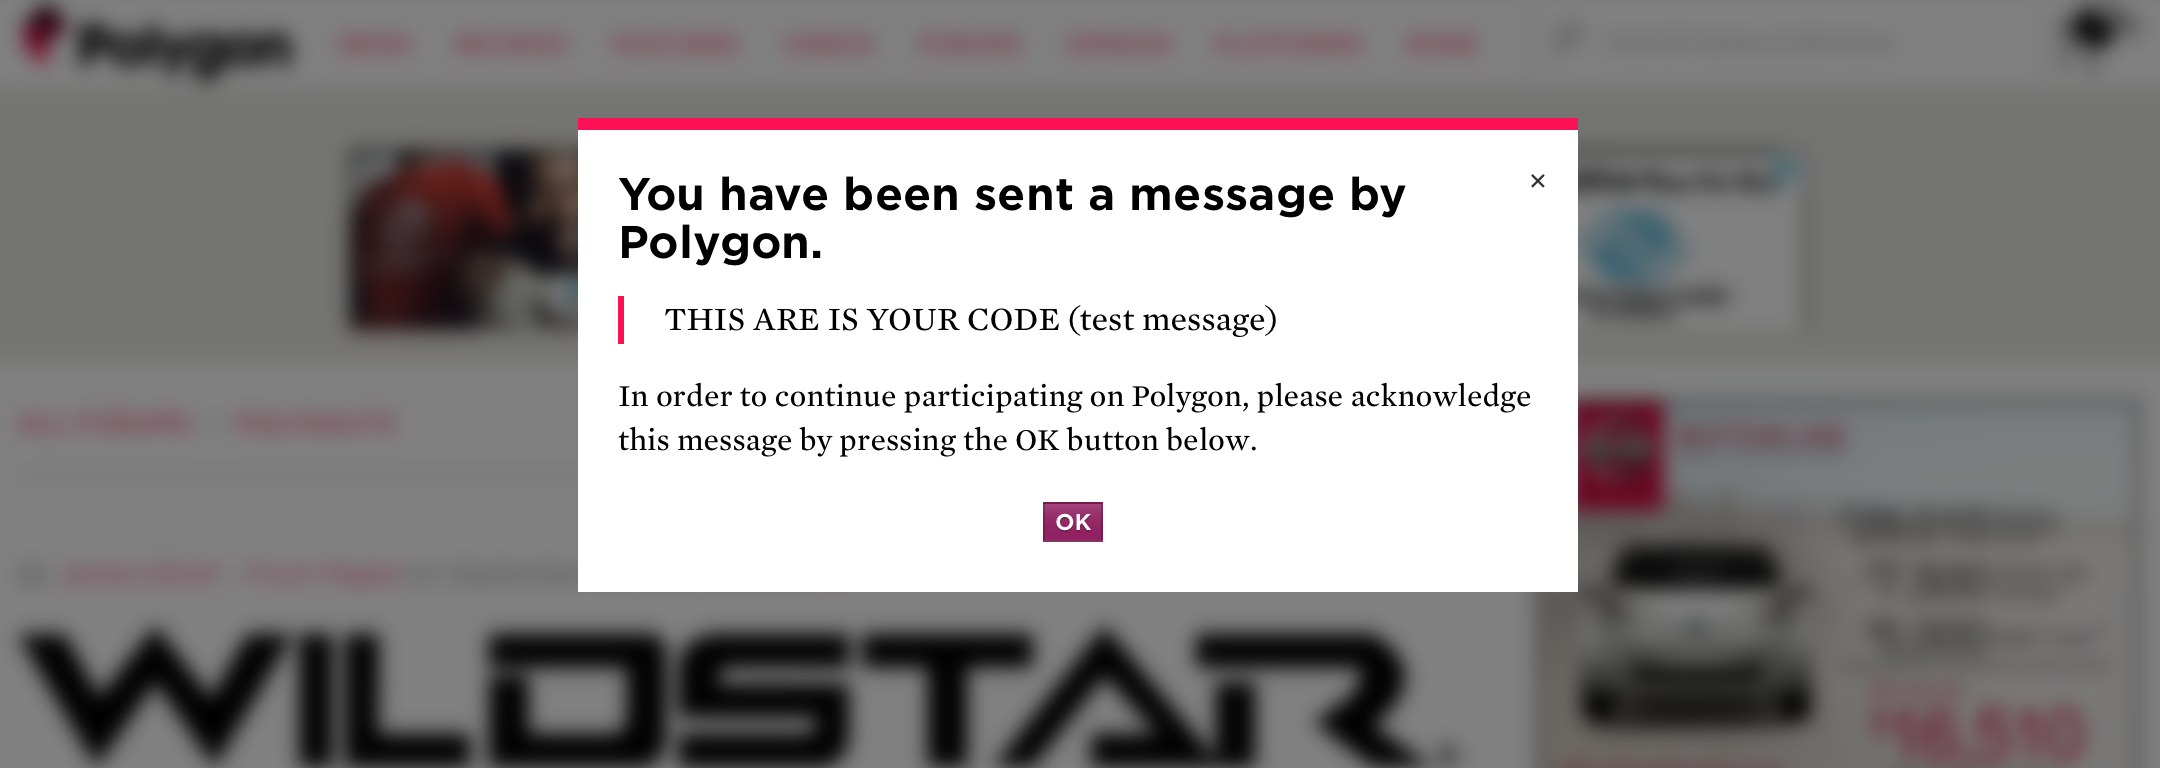 Polygon message example